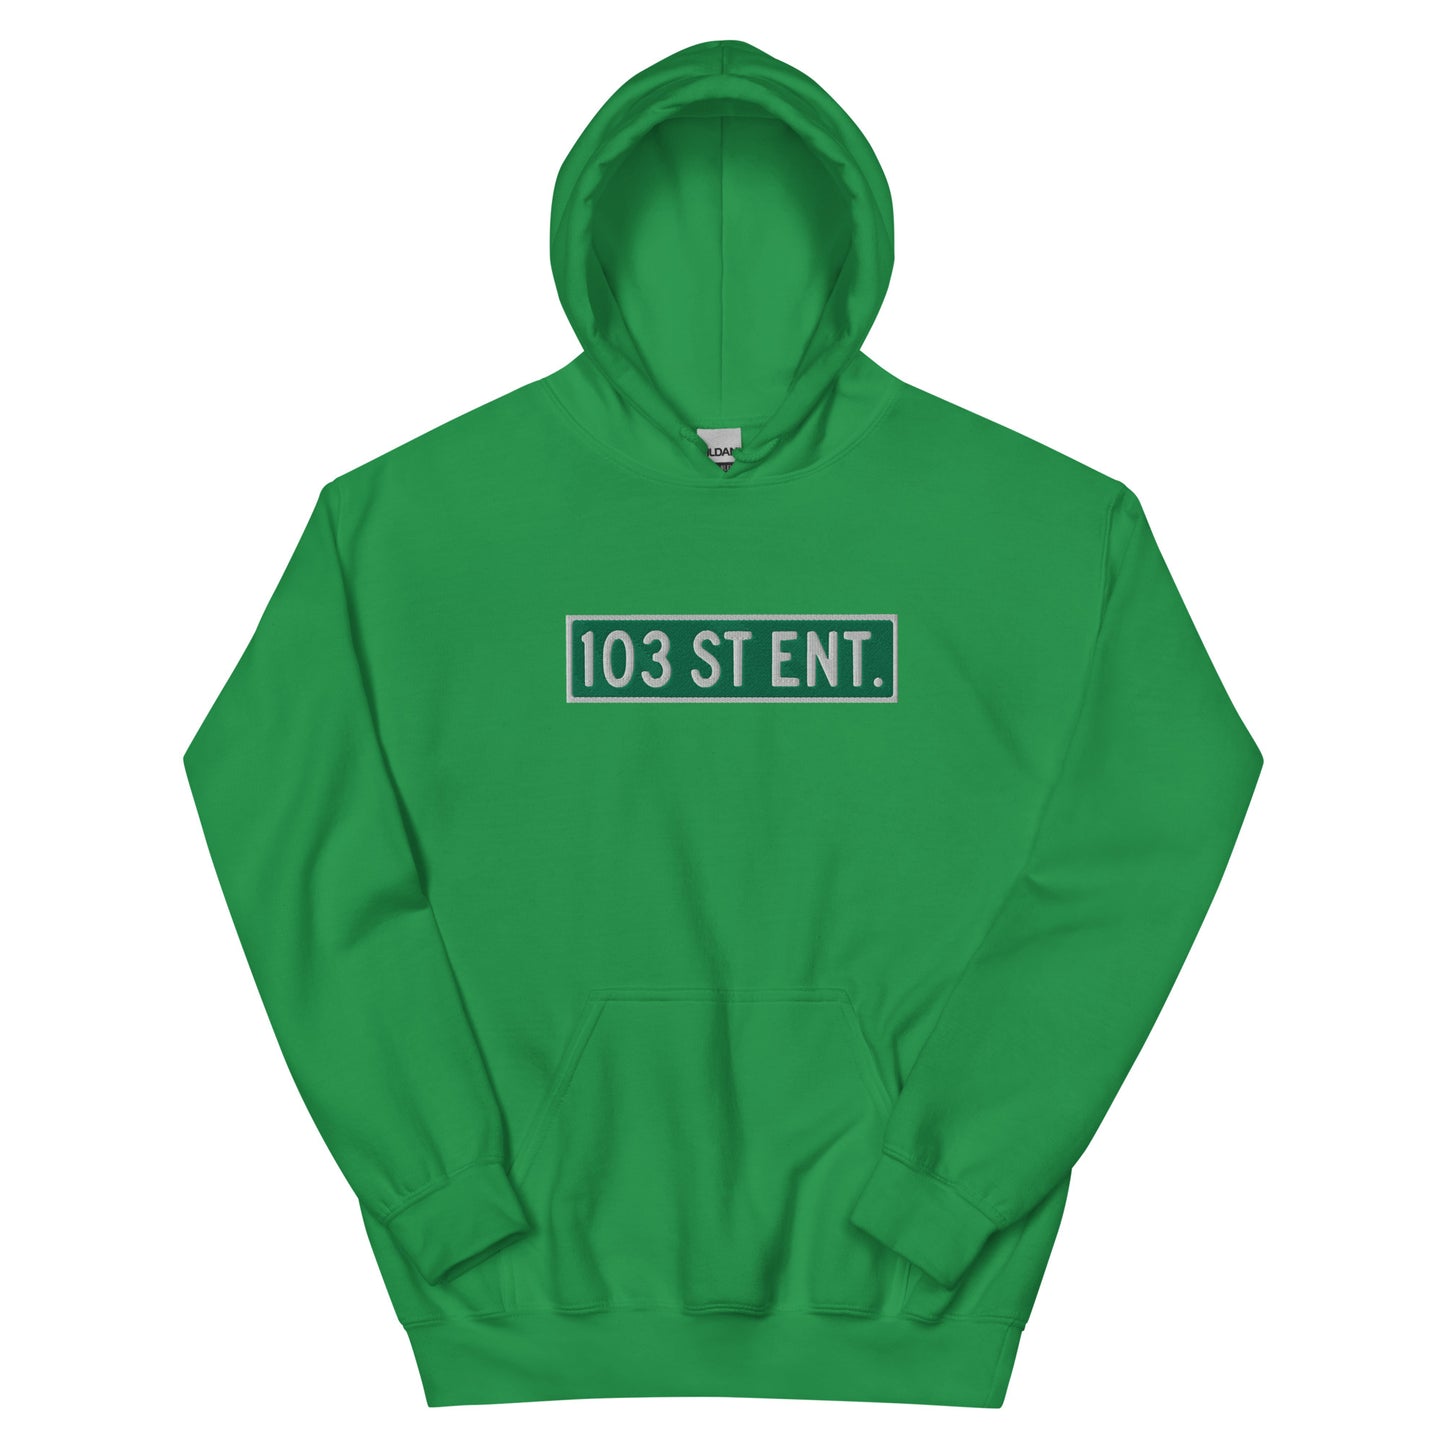 Bumpy103 - "Gas" Hoody With Embroidered 103rd Street Ent. Logo